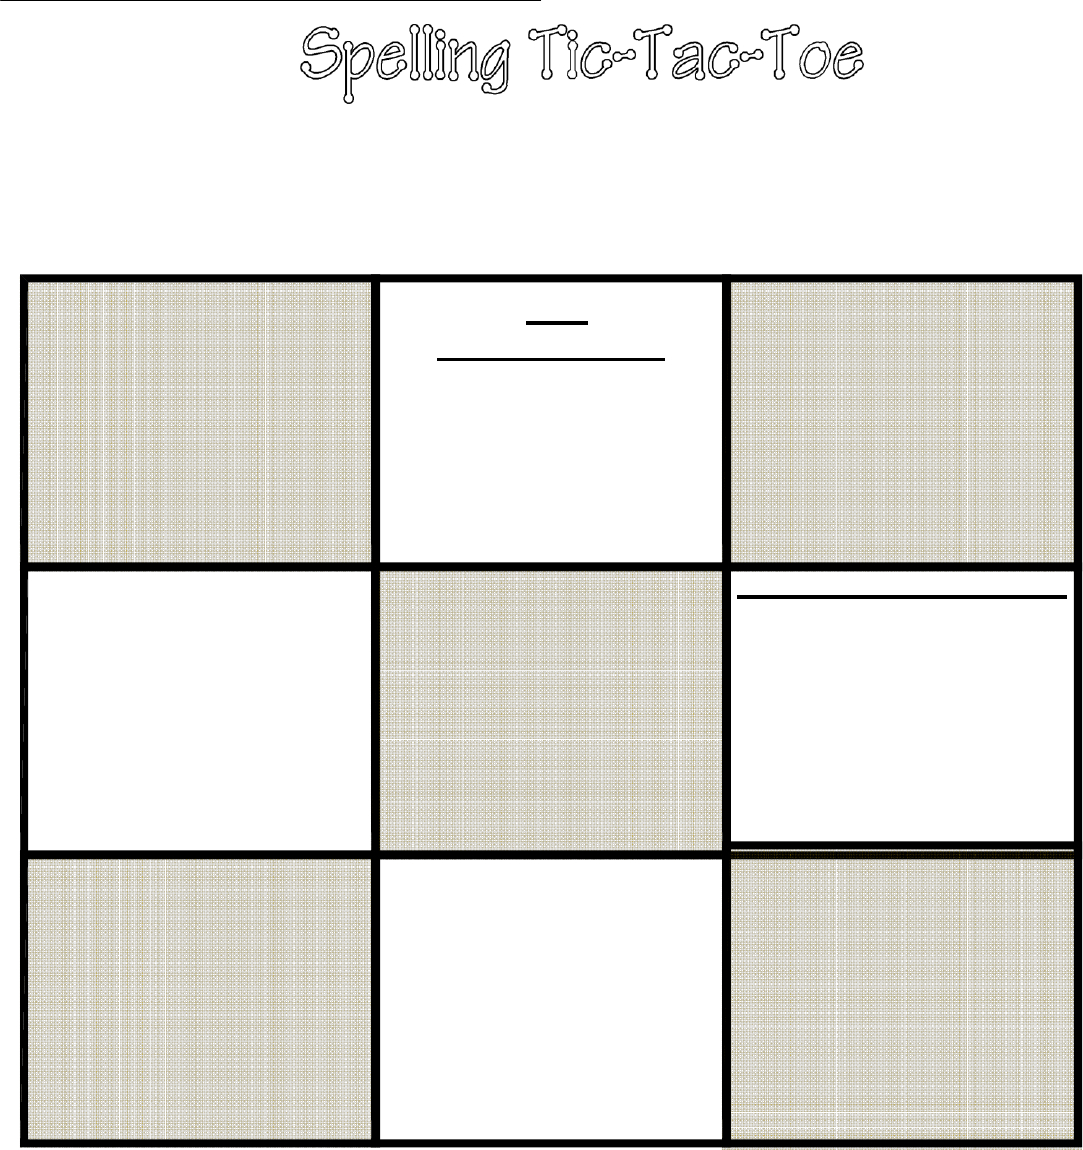 Tic Tac Toe Template In Word And Pdf Formats Throughout Tic Tac Toe Template Word